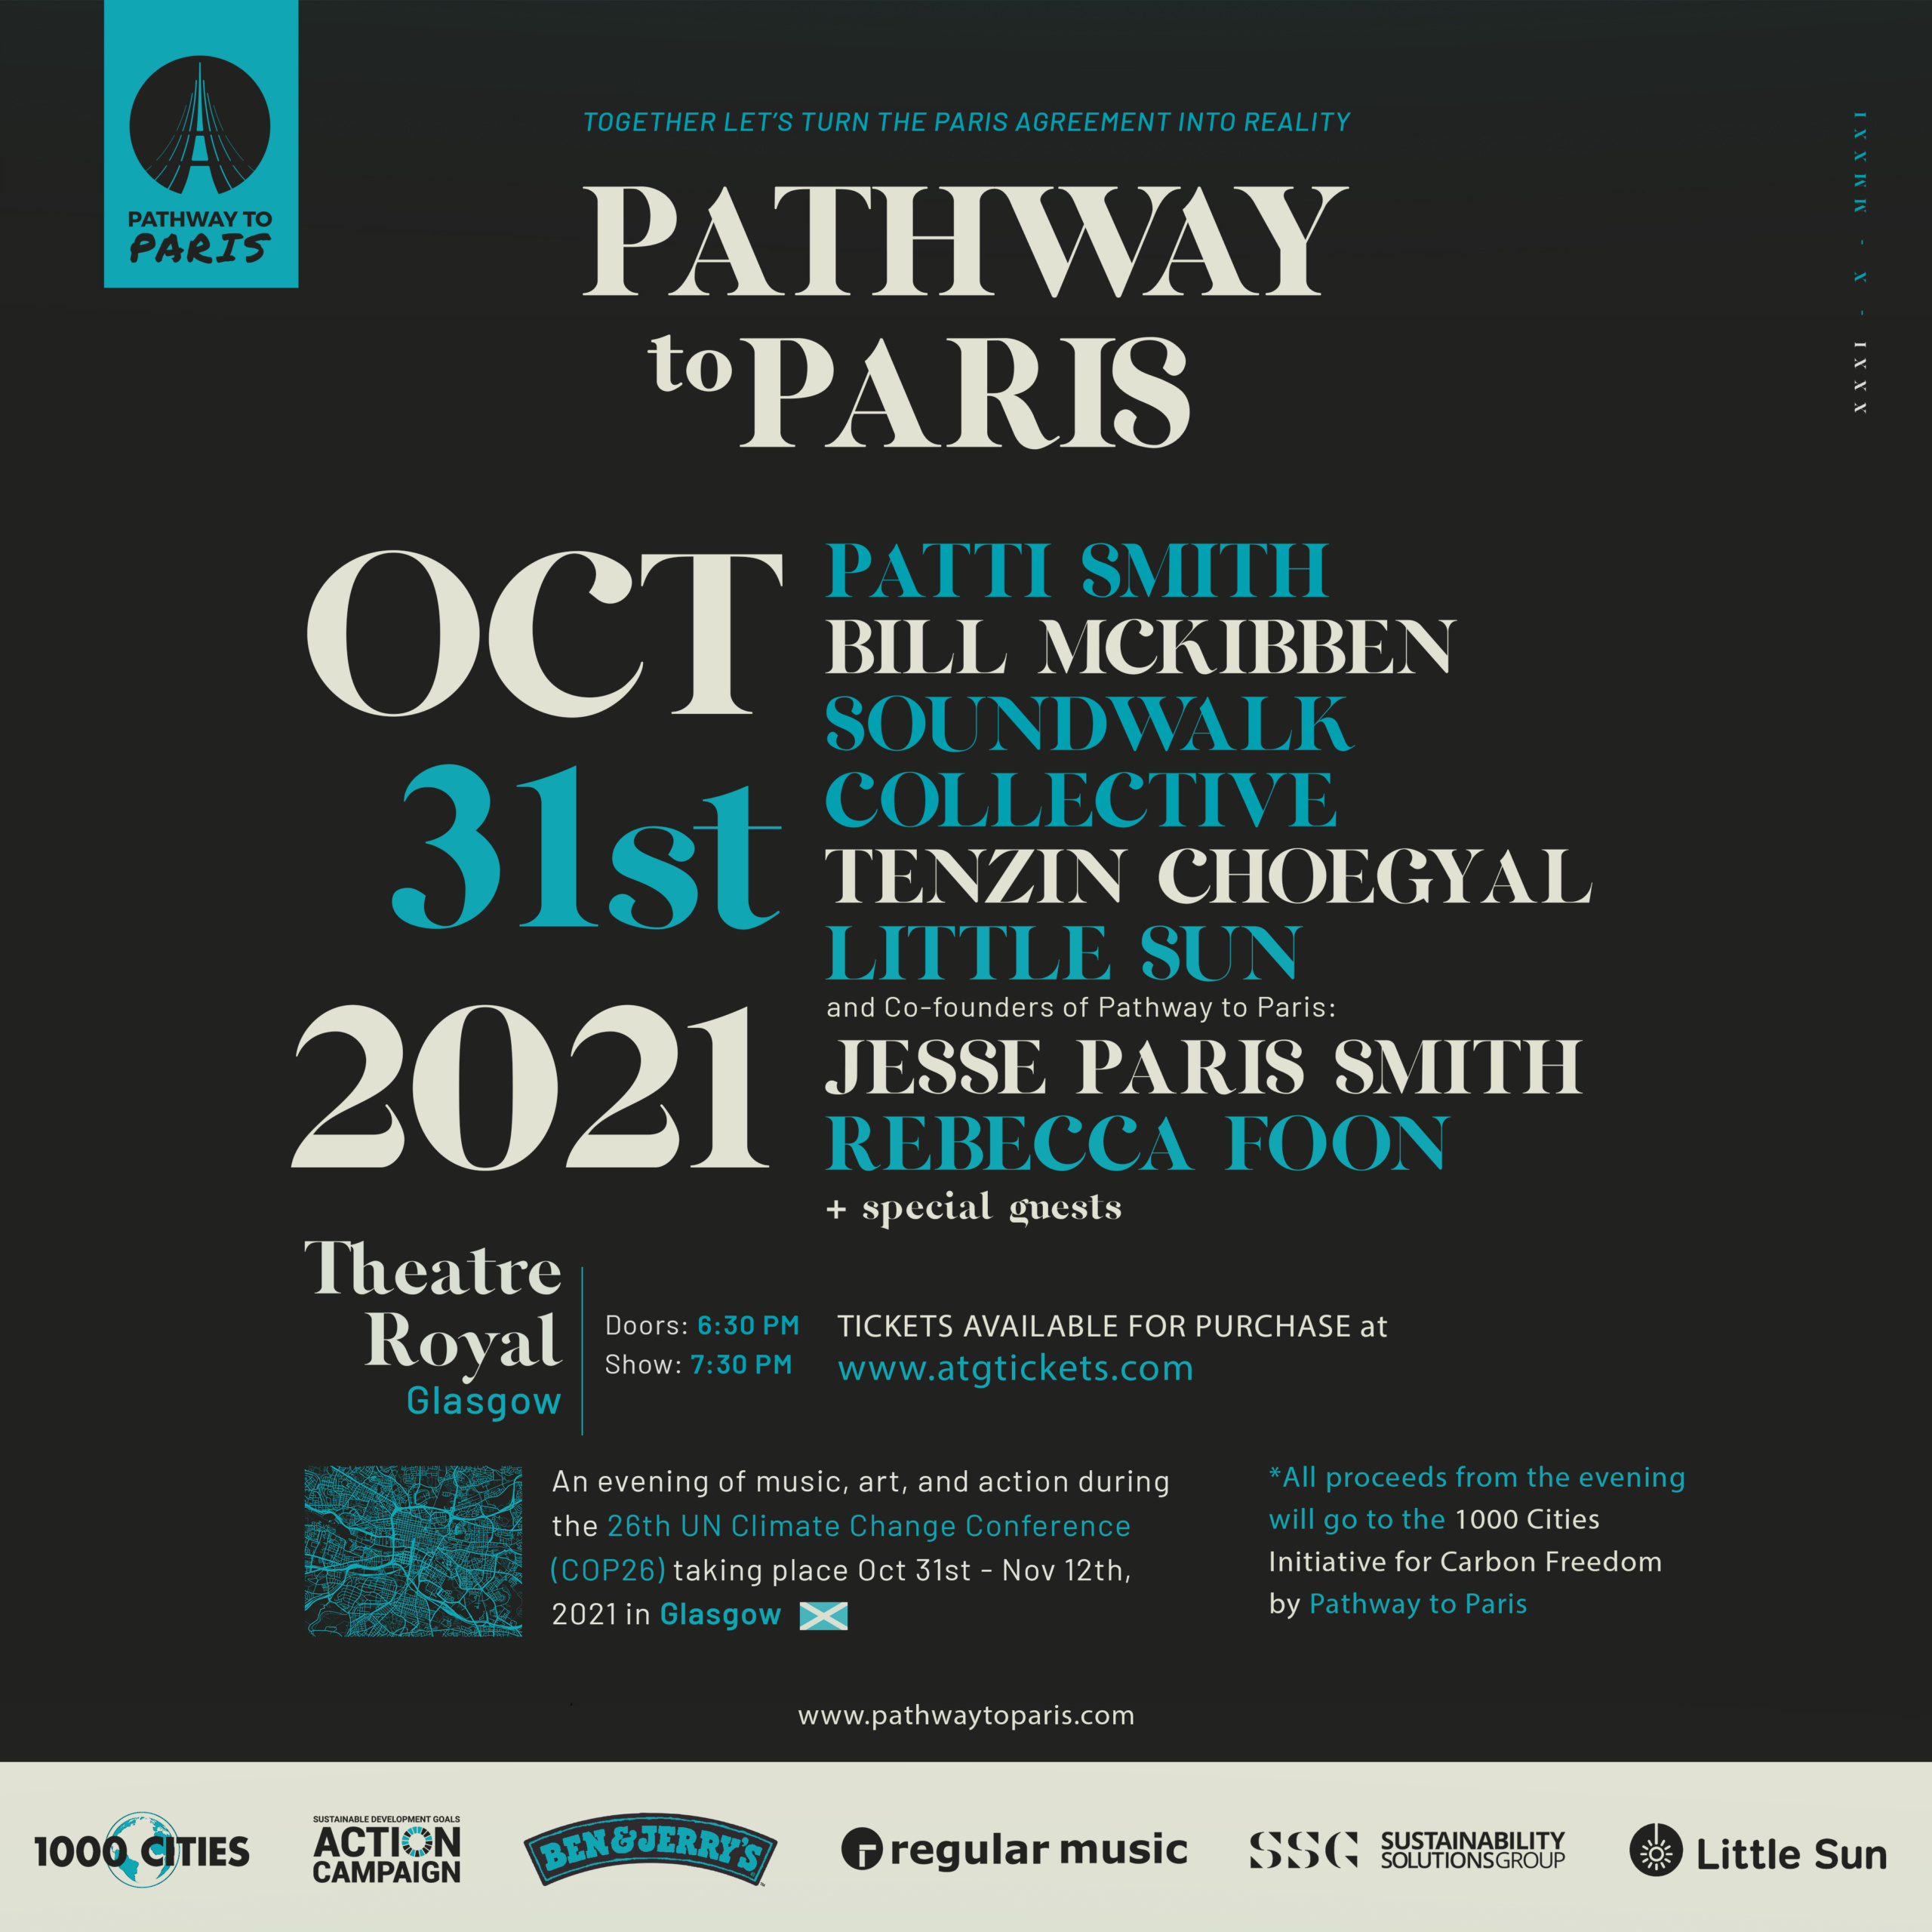 Pathway to Pairs at Theatre Royal in Glasgow on October 31st 2021